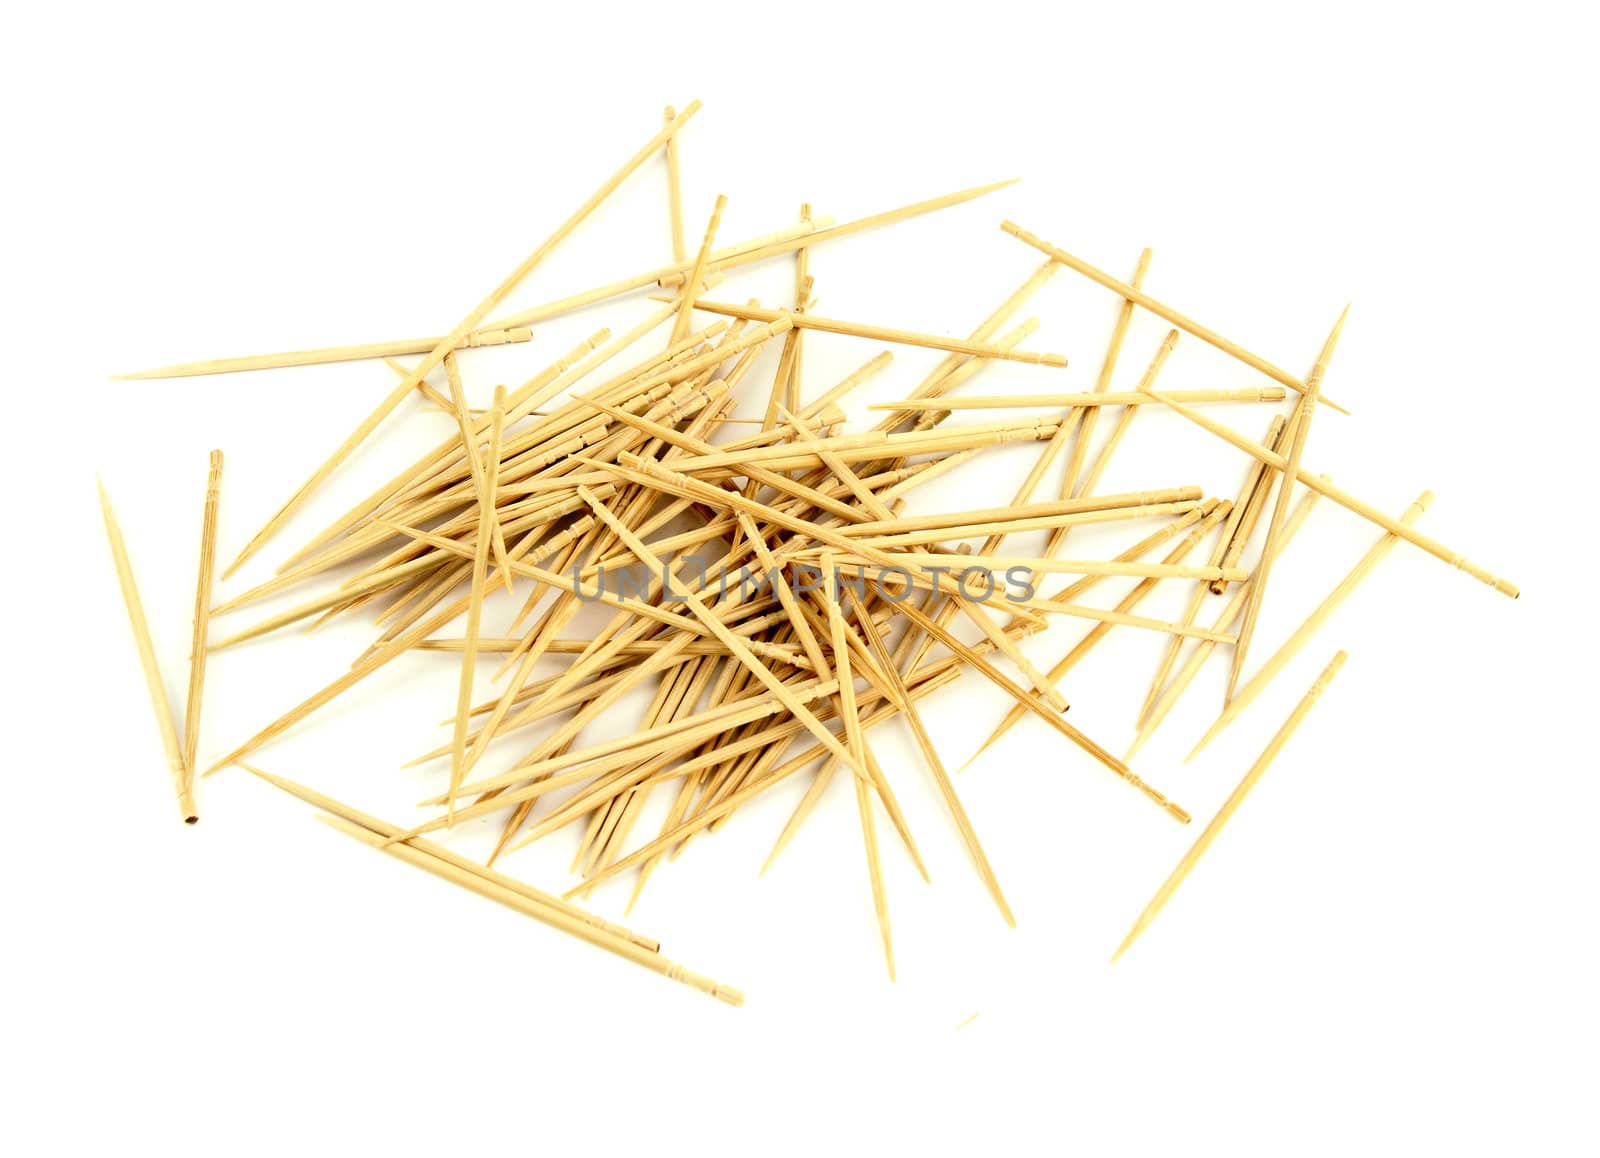 Many chaotic scattered toothpicks, isolated on white by geargodz